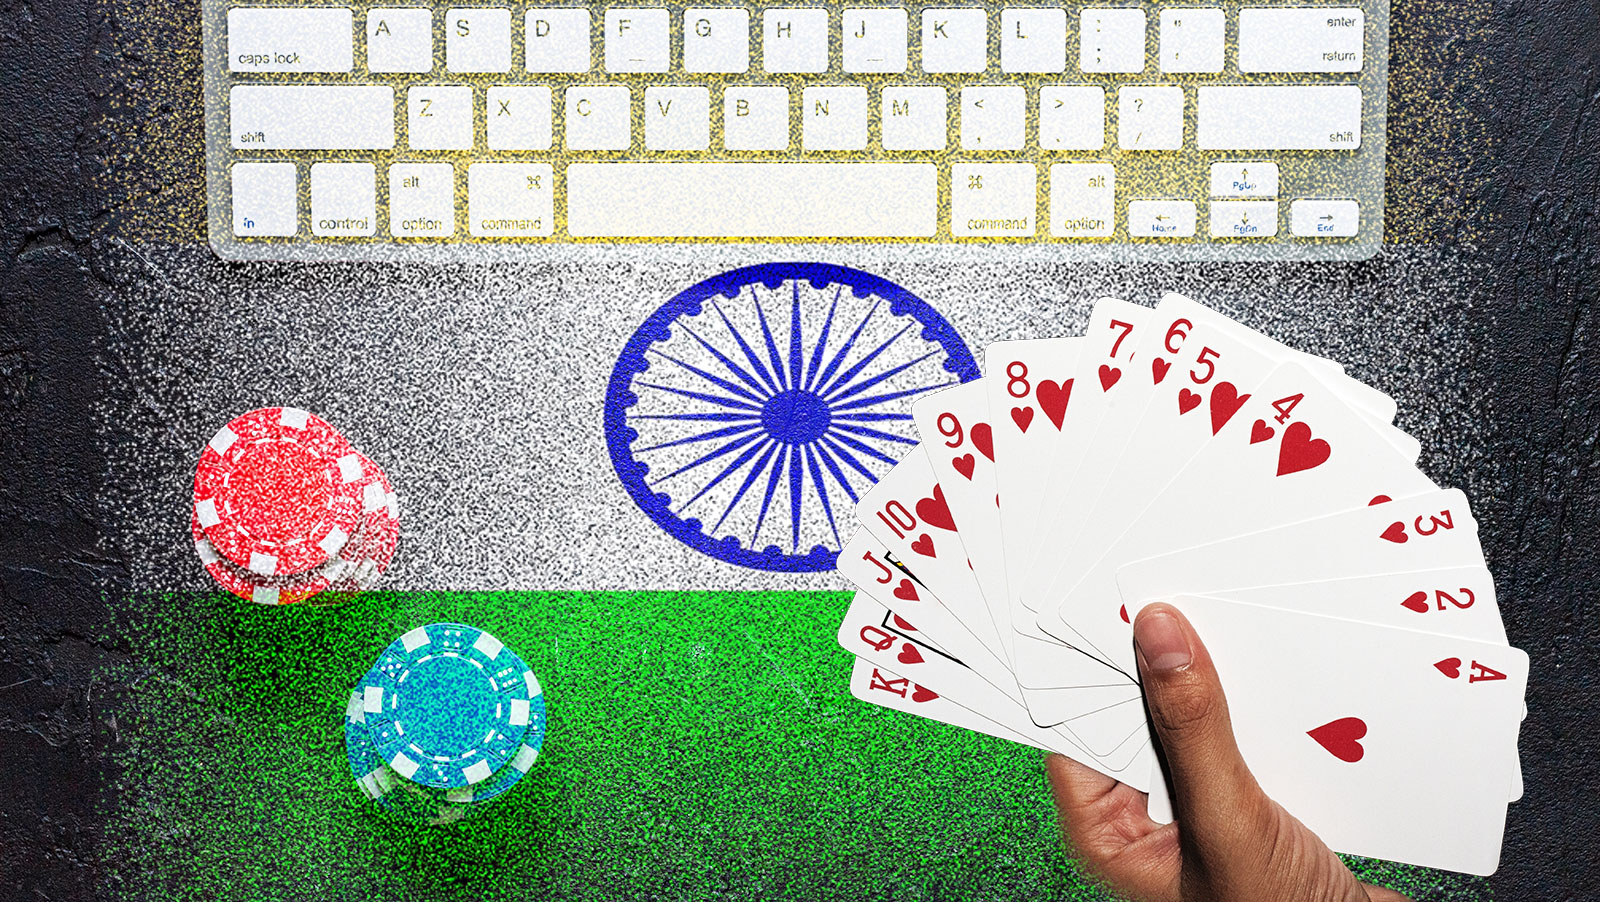 Rummy companies move to Tamil Nadu as challenges to Telangana's decrees continue